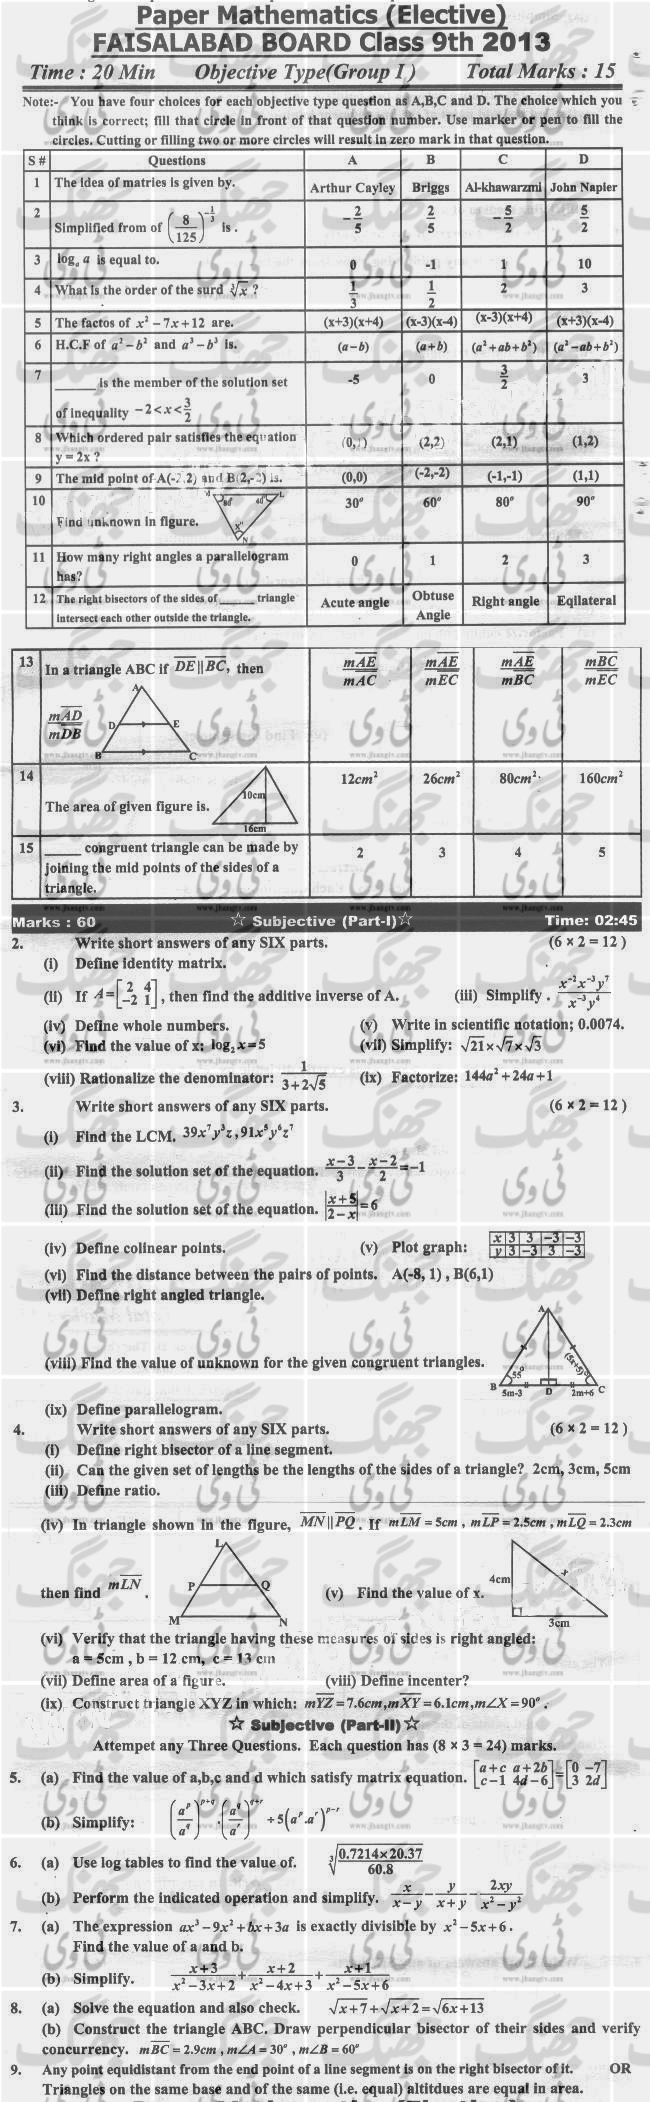 Past-Papers-2013-Faisalabad-Board-9th-Class-Mathematics-Elective-Group-1-English-Version copy